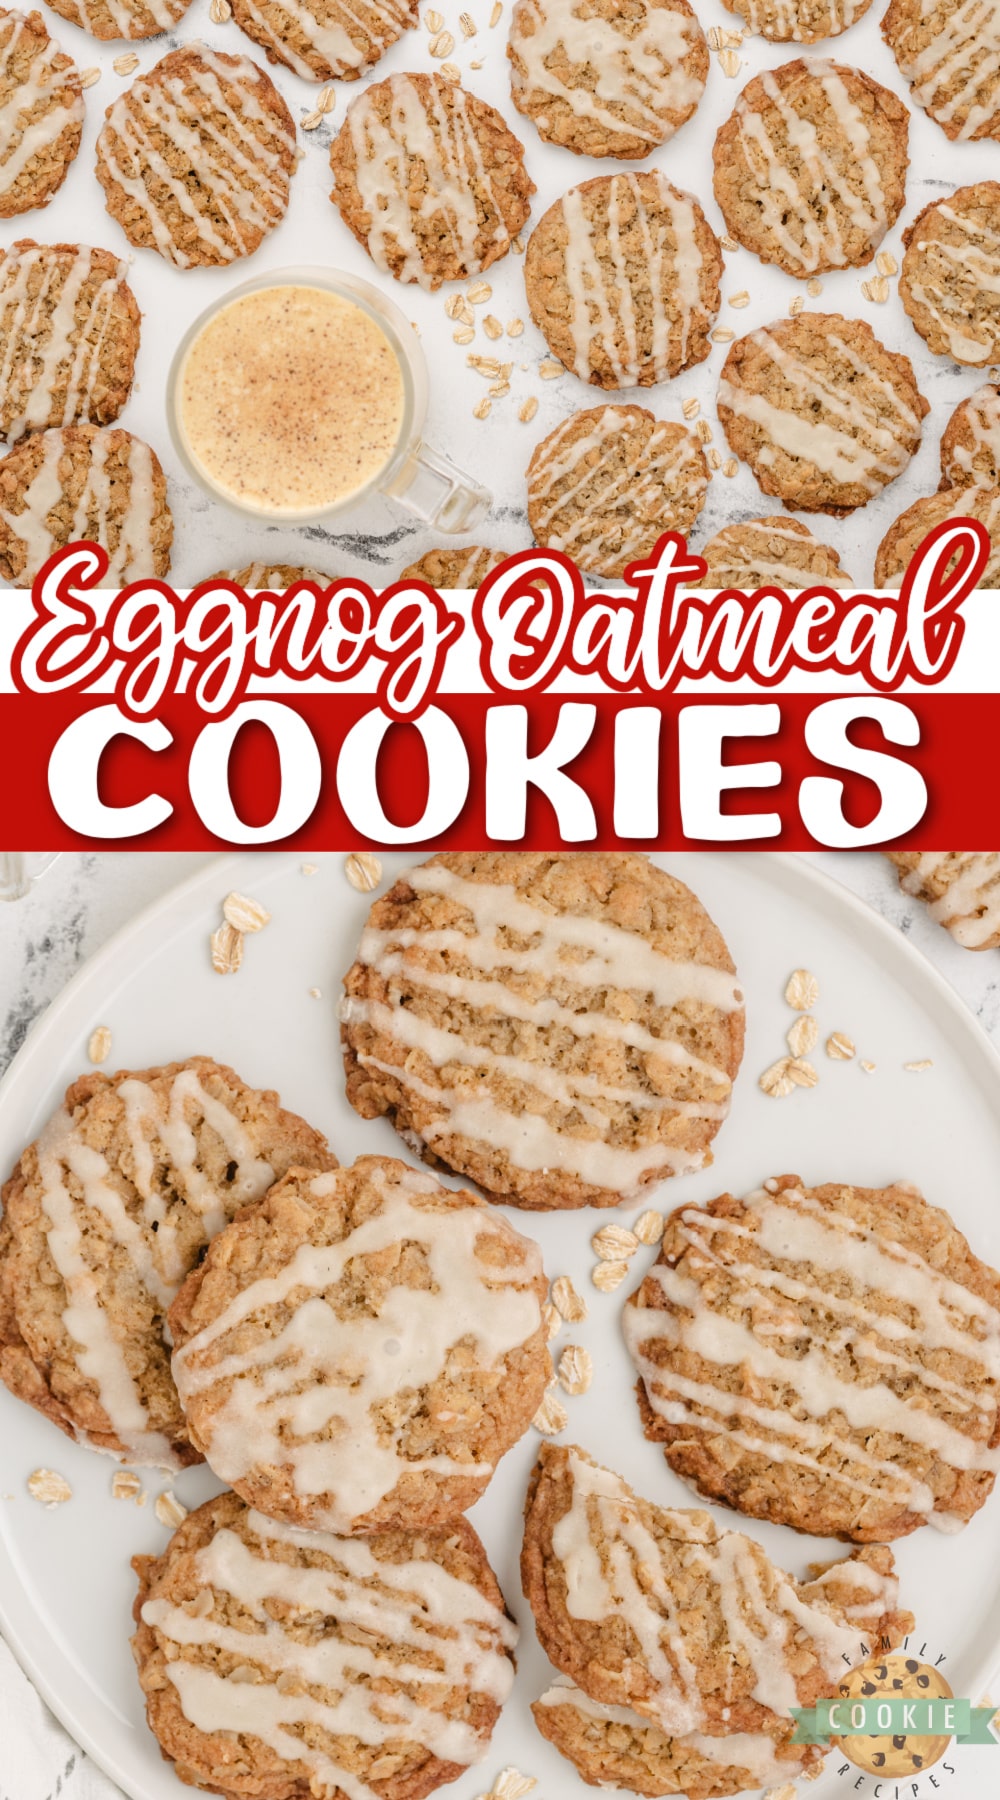 Eggnog Oatmeal Cookies are made with eggnog in the cookies and the glaze on top. Perfect cookies for the holiday season! 